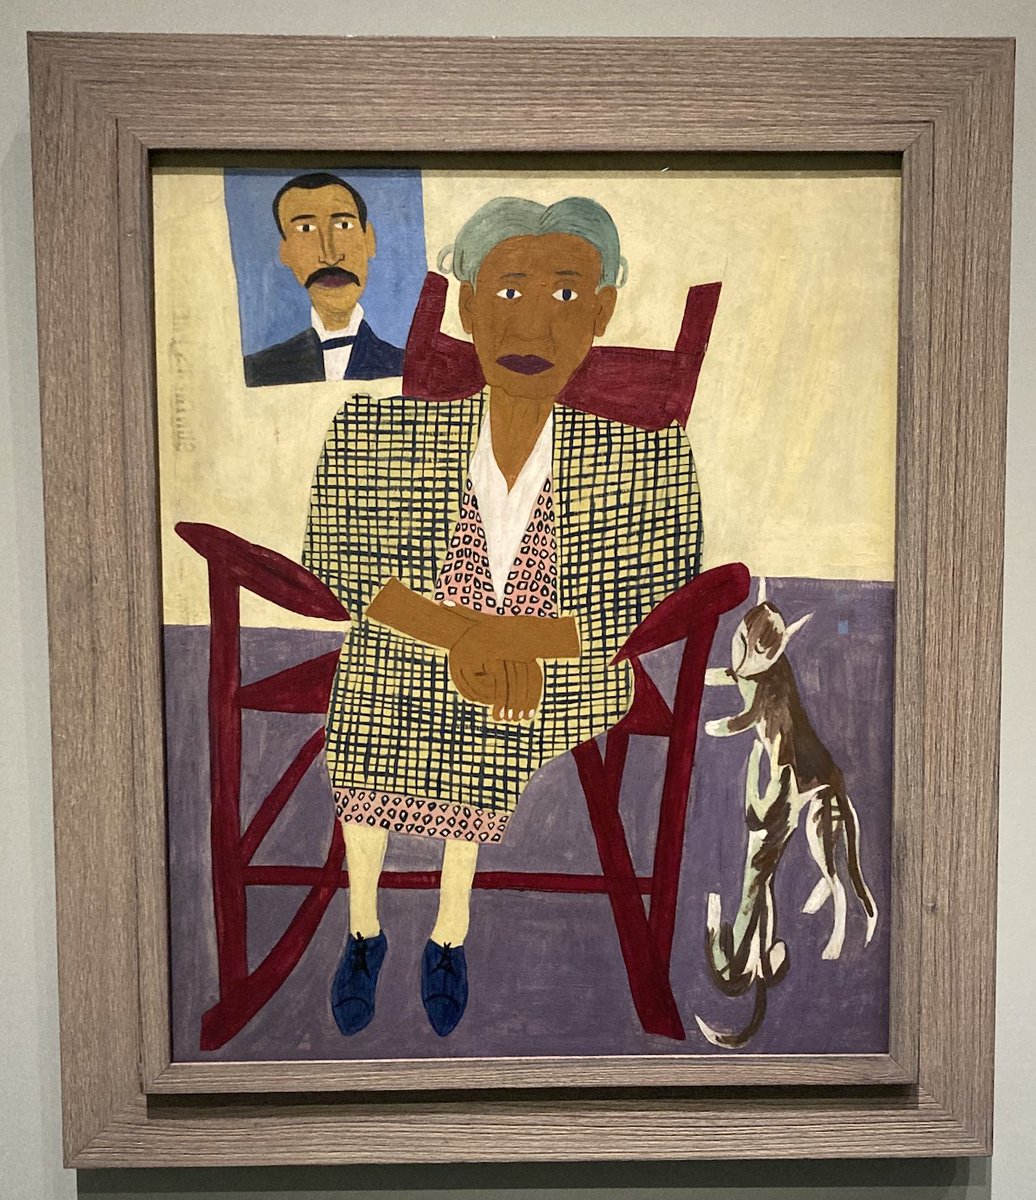 William H. Johnson, Mom and Dad, 1944 (and two cats) #Harlemrenaissance @metmuseum